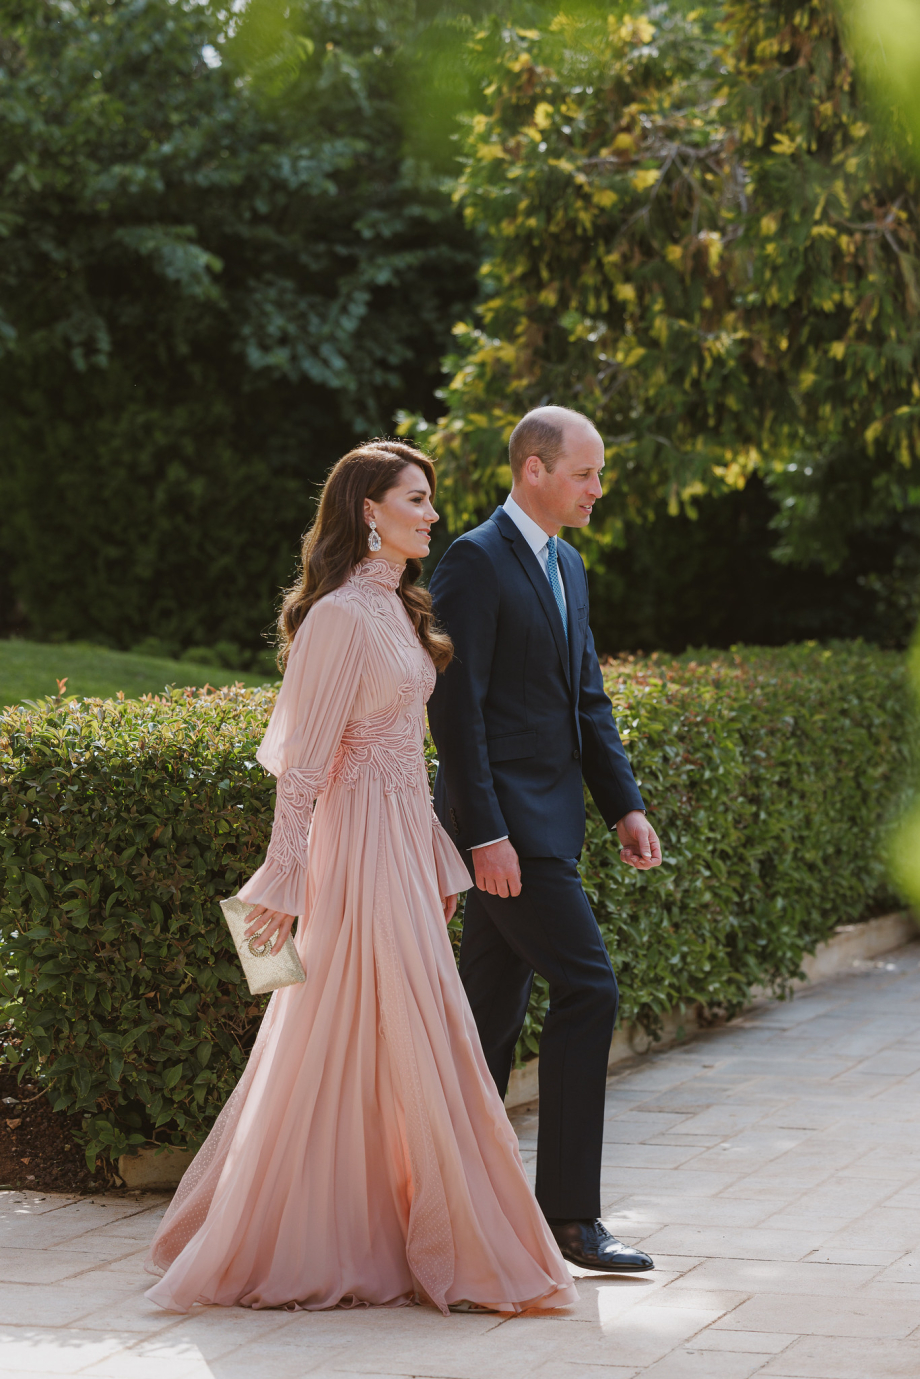 The Prince and Princess of Wales attend the wedding of he Crown Prince of the Hashemite Kingdom of Jordan with Miss Rajwa Al Saif 